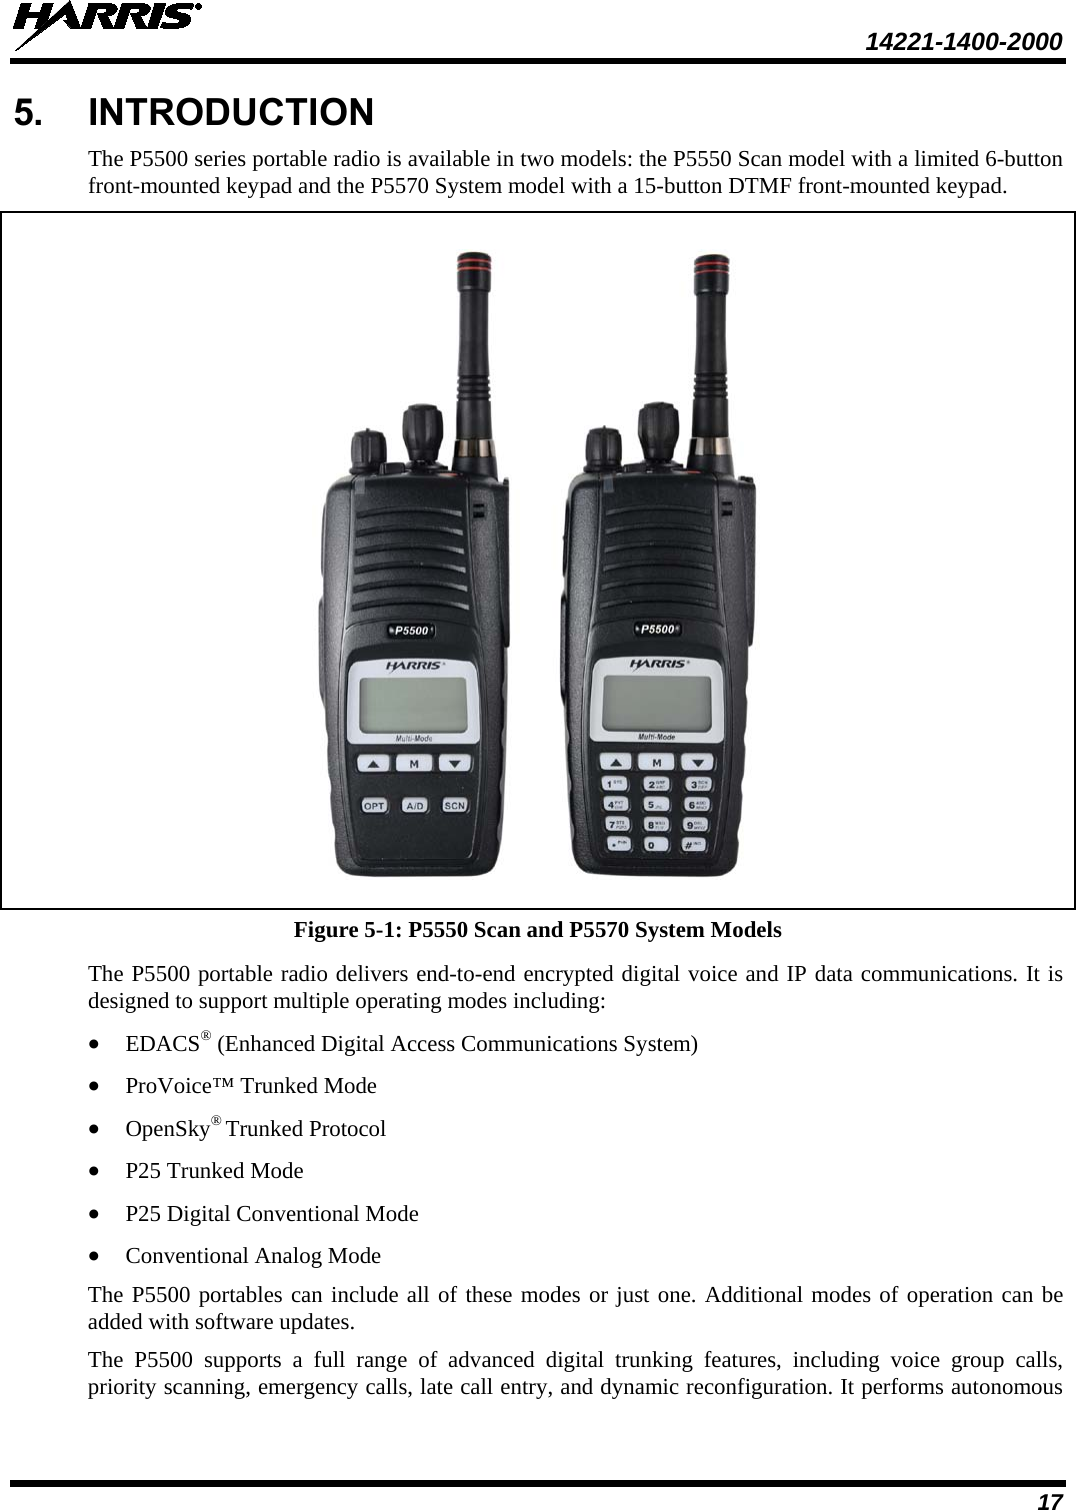  14221-1400-2000  17 5. INTRODUCTION The P5500 series portable radio is available in two models: the P5550 Scan model with a limited 6-button front-mounted keypad and the P5570 System model with a 15-button DTMF front-mounted keypad.     Figure 5-1: P5550 Scan and P5570 System Models The P5500 portable radio delivers end-to-end encrypted digital voice and IP data communications. It is designed to support multiple operating modes including: • EDACS® (Enhanced Digital Access Communications System) • ProVoice™ Trunked Mode • OpenSky® Trunked Protocol • P25 Trunked Mode • P25 Digital Conventional Mode • Conventional Analog Mode The P5500 portables can include all of these modes or just one. Additional modes of operation can be added with software updates. The  P5500 supports a full range of advanced digital trunking features, including voice group calls, priority scanning, emergency calls, late call entry, and dynamic reconfiguration. It performs autonomous 